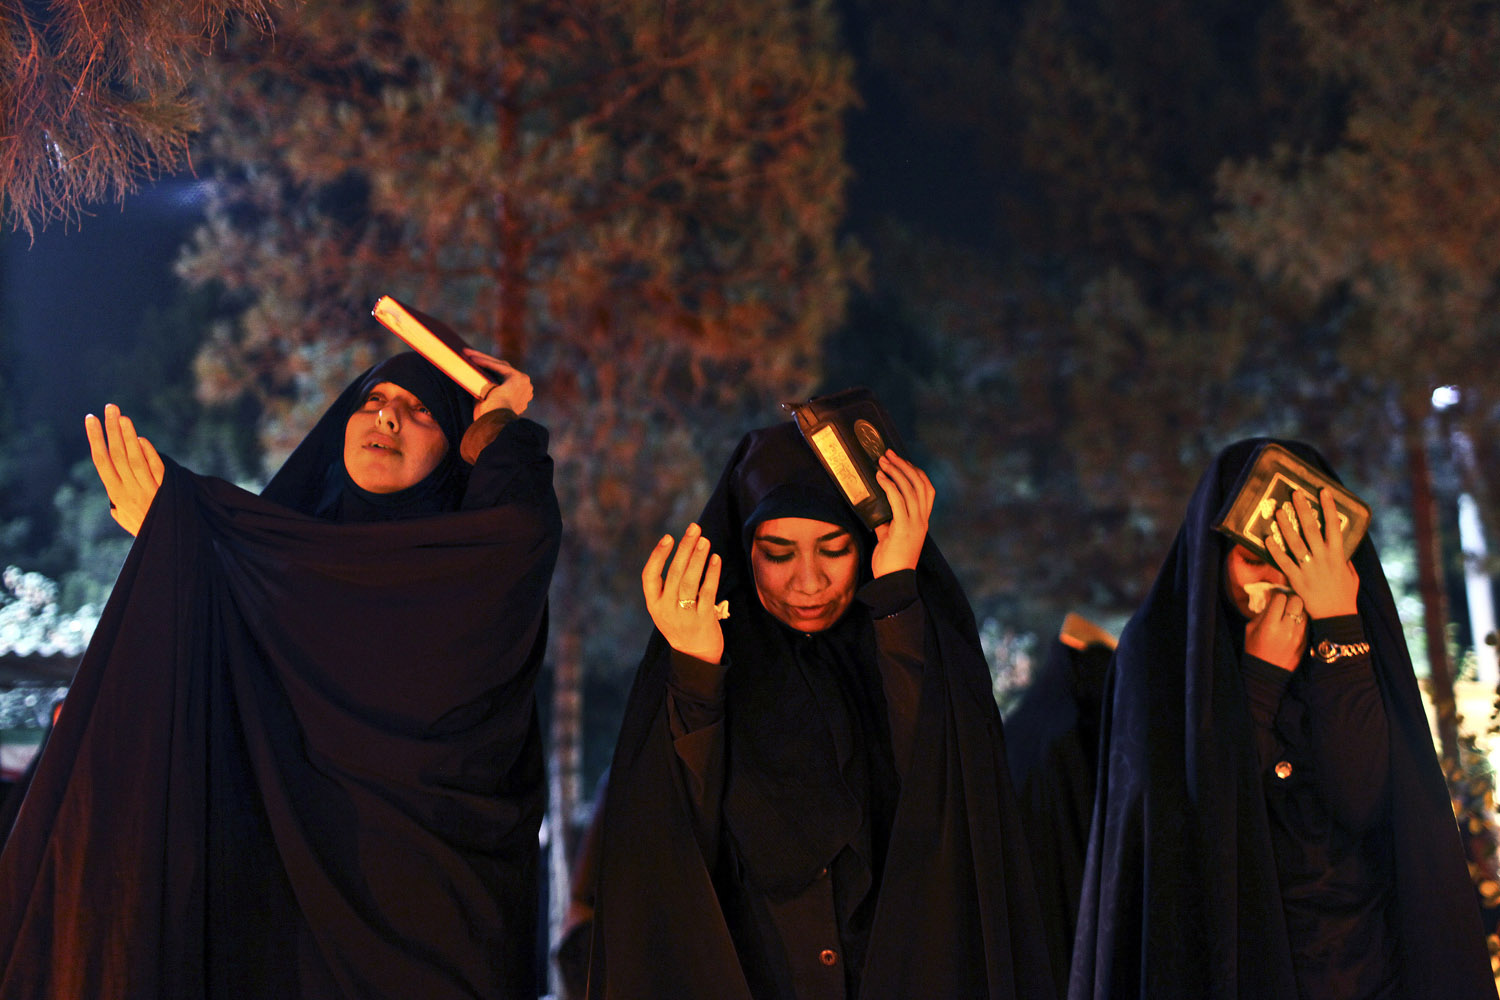 July 30, 2013. Iranian women place copies of the Quran on their heads as they mourn, during a religious ceremony marking Imam Ali's death at the Behesht-e-Zahra cemetery, just outside Tehran.